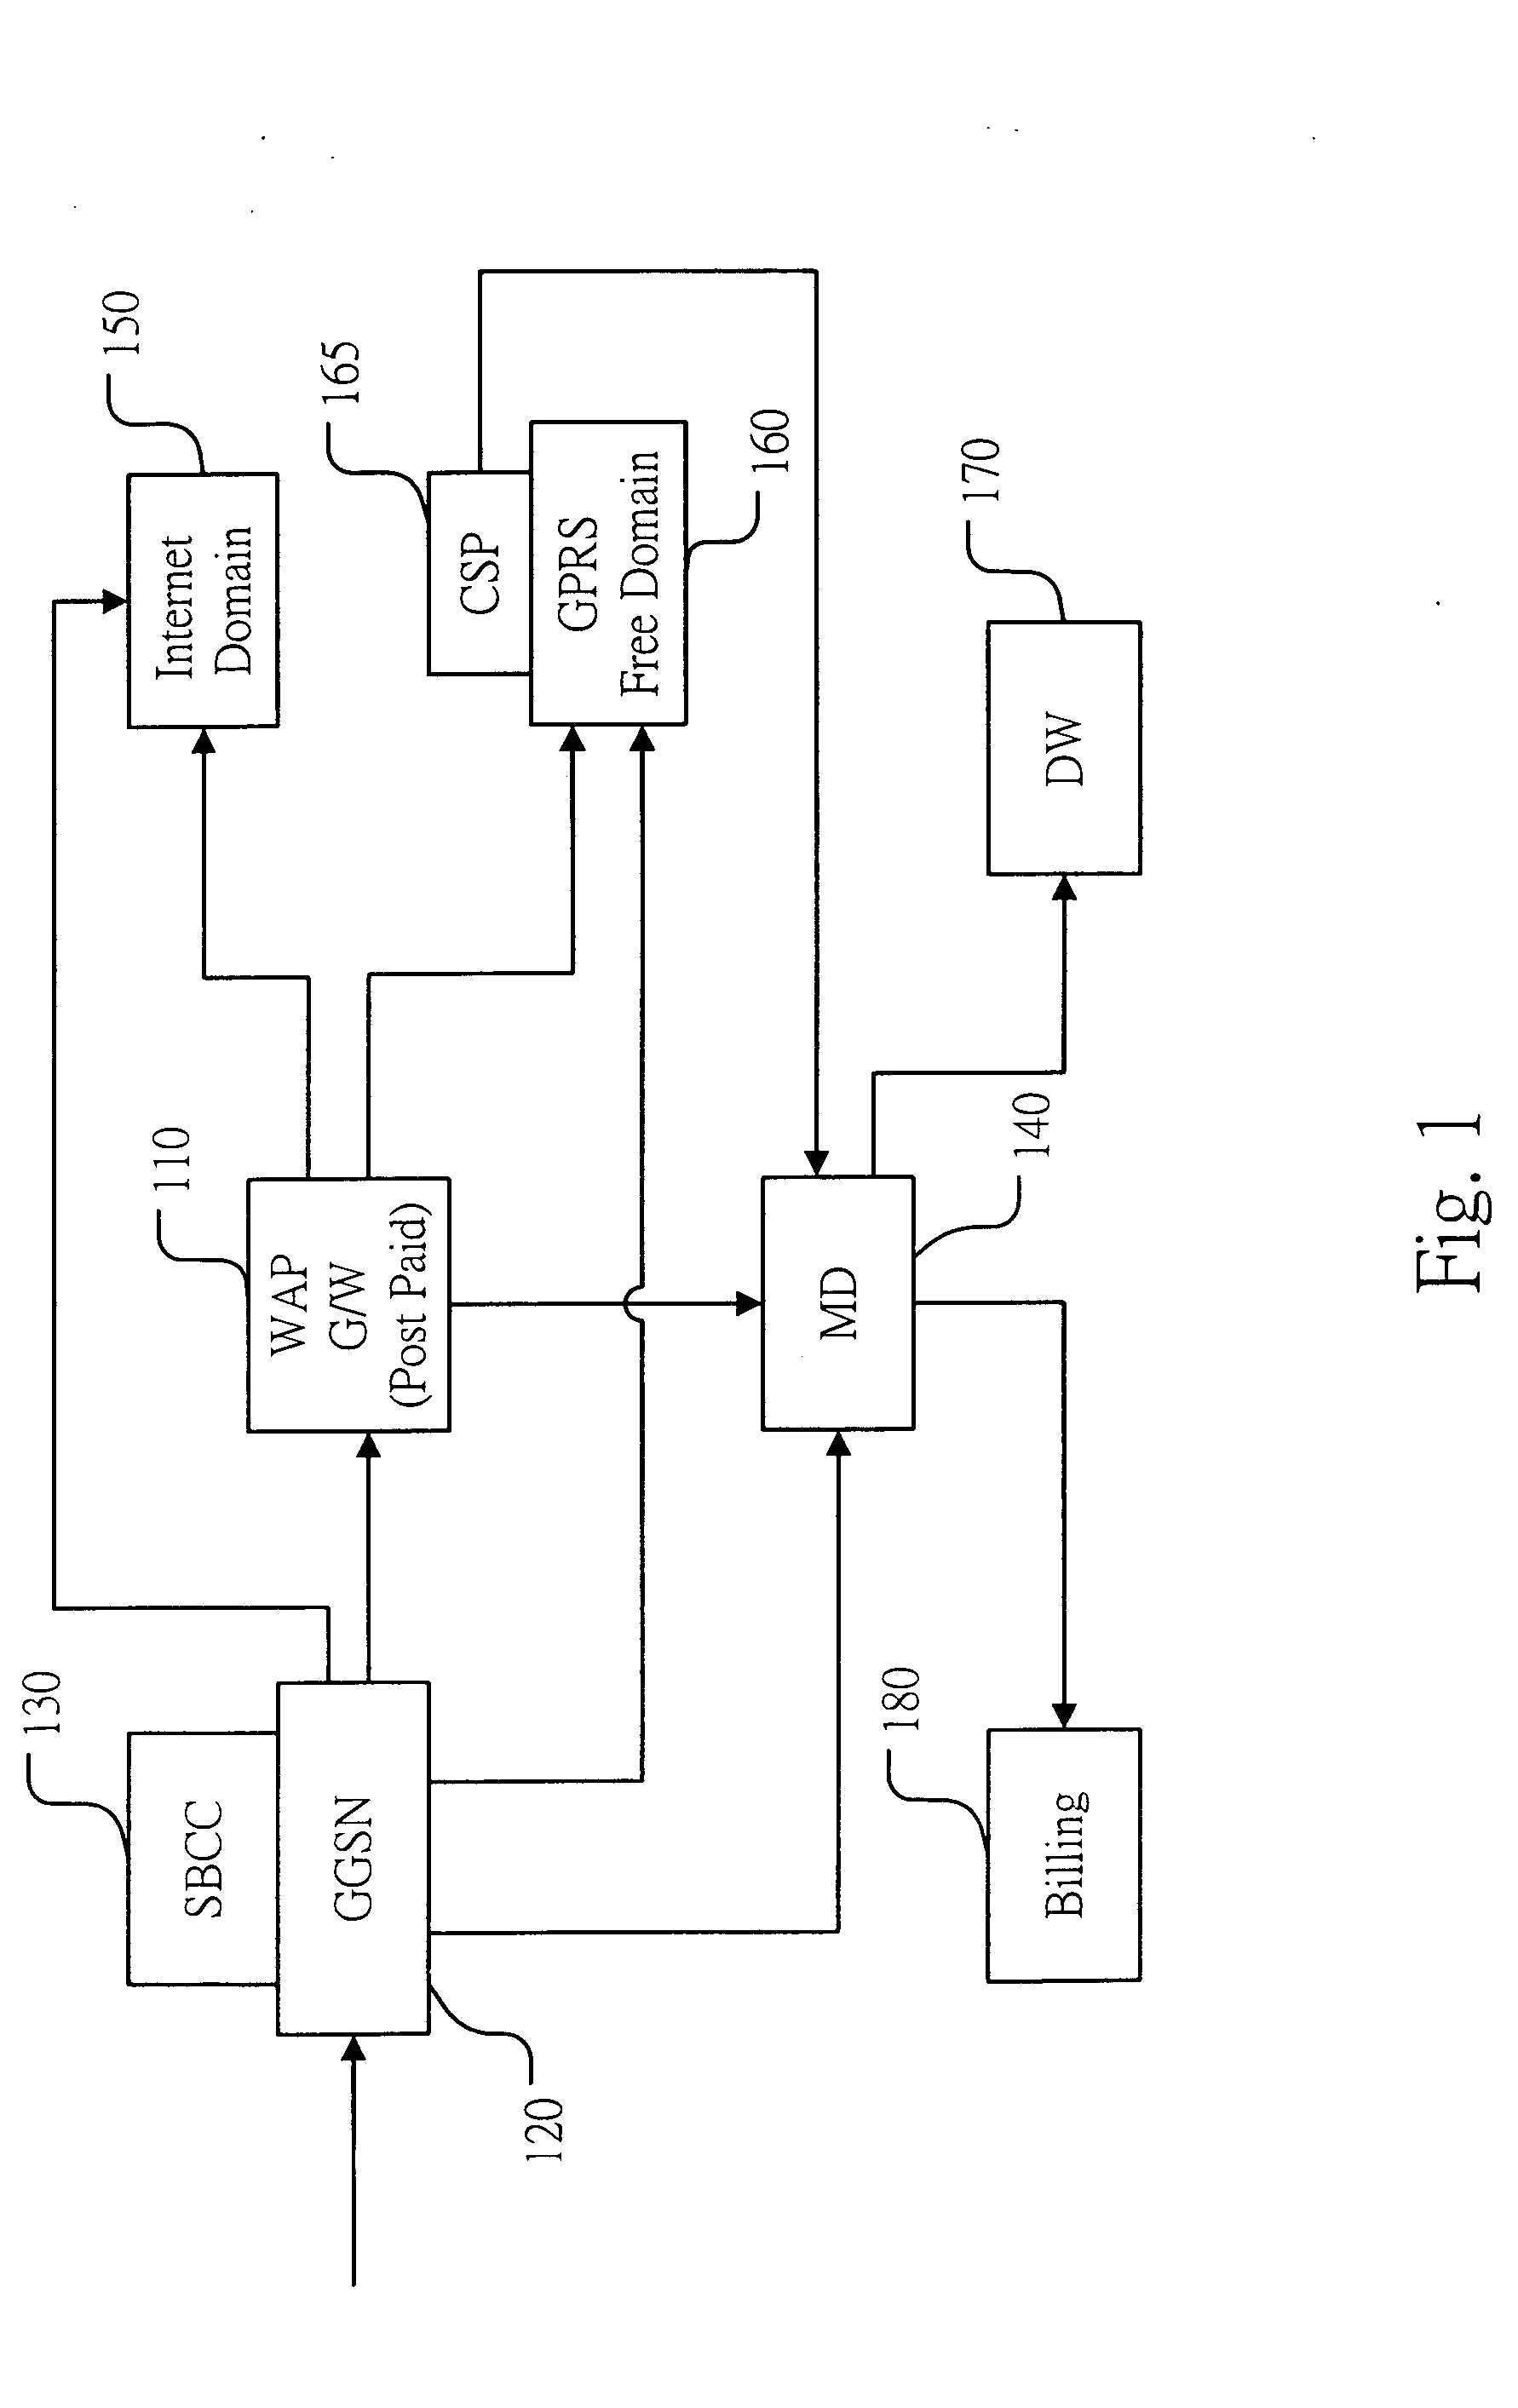 Mobile network content based charging and access control system